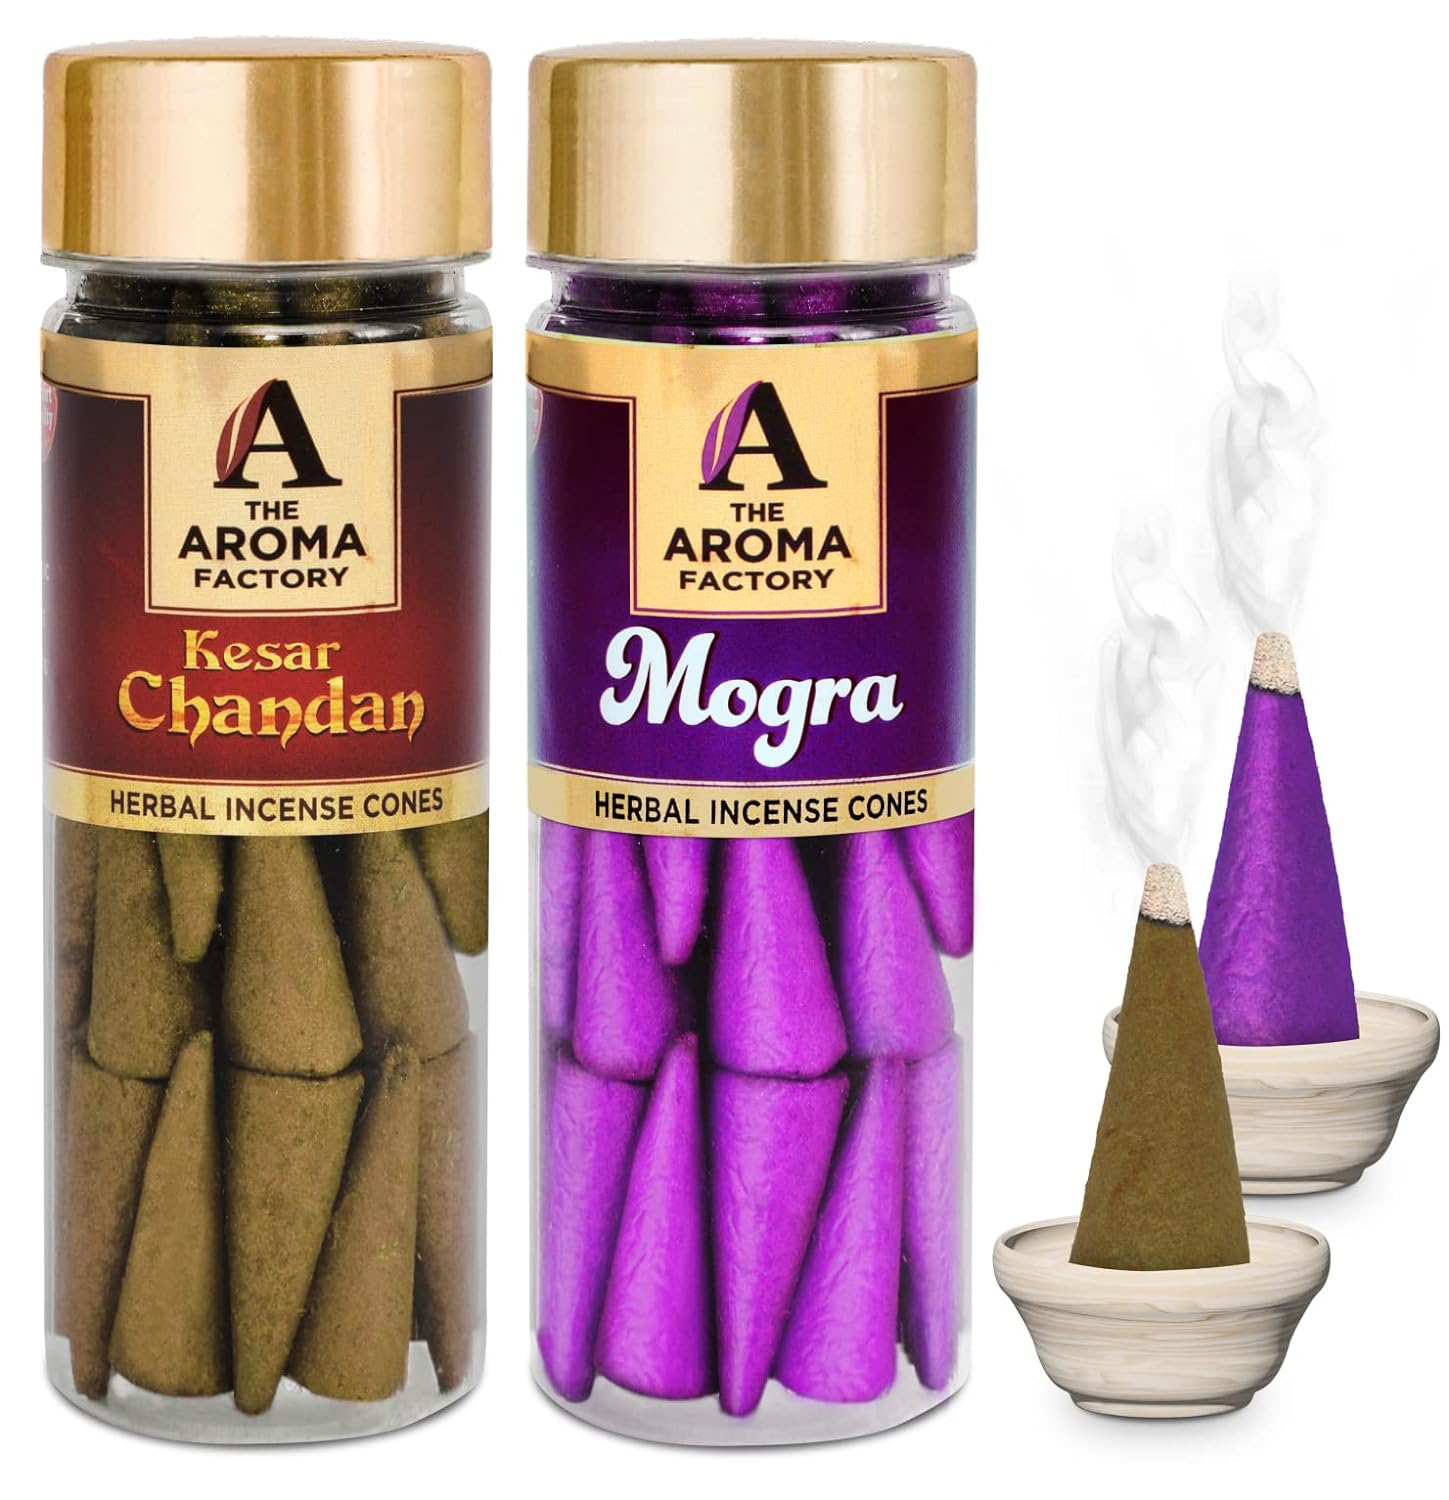 The Aroma Factory Incense Dhoop Cone for Pooja, Kesar Chandan & Mogra (100% Herbal & 0% Charcoal) 2 Bottles x 30 Cones